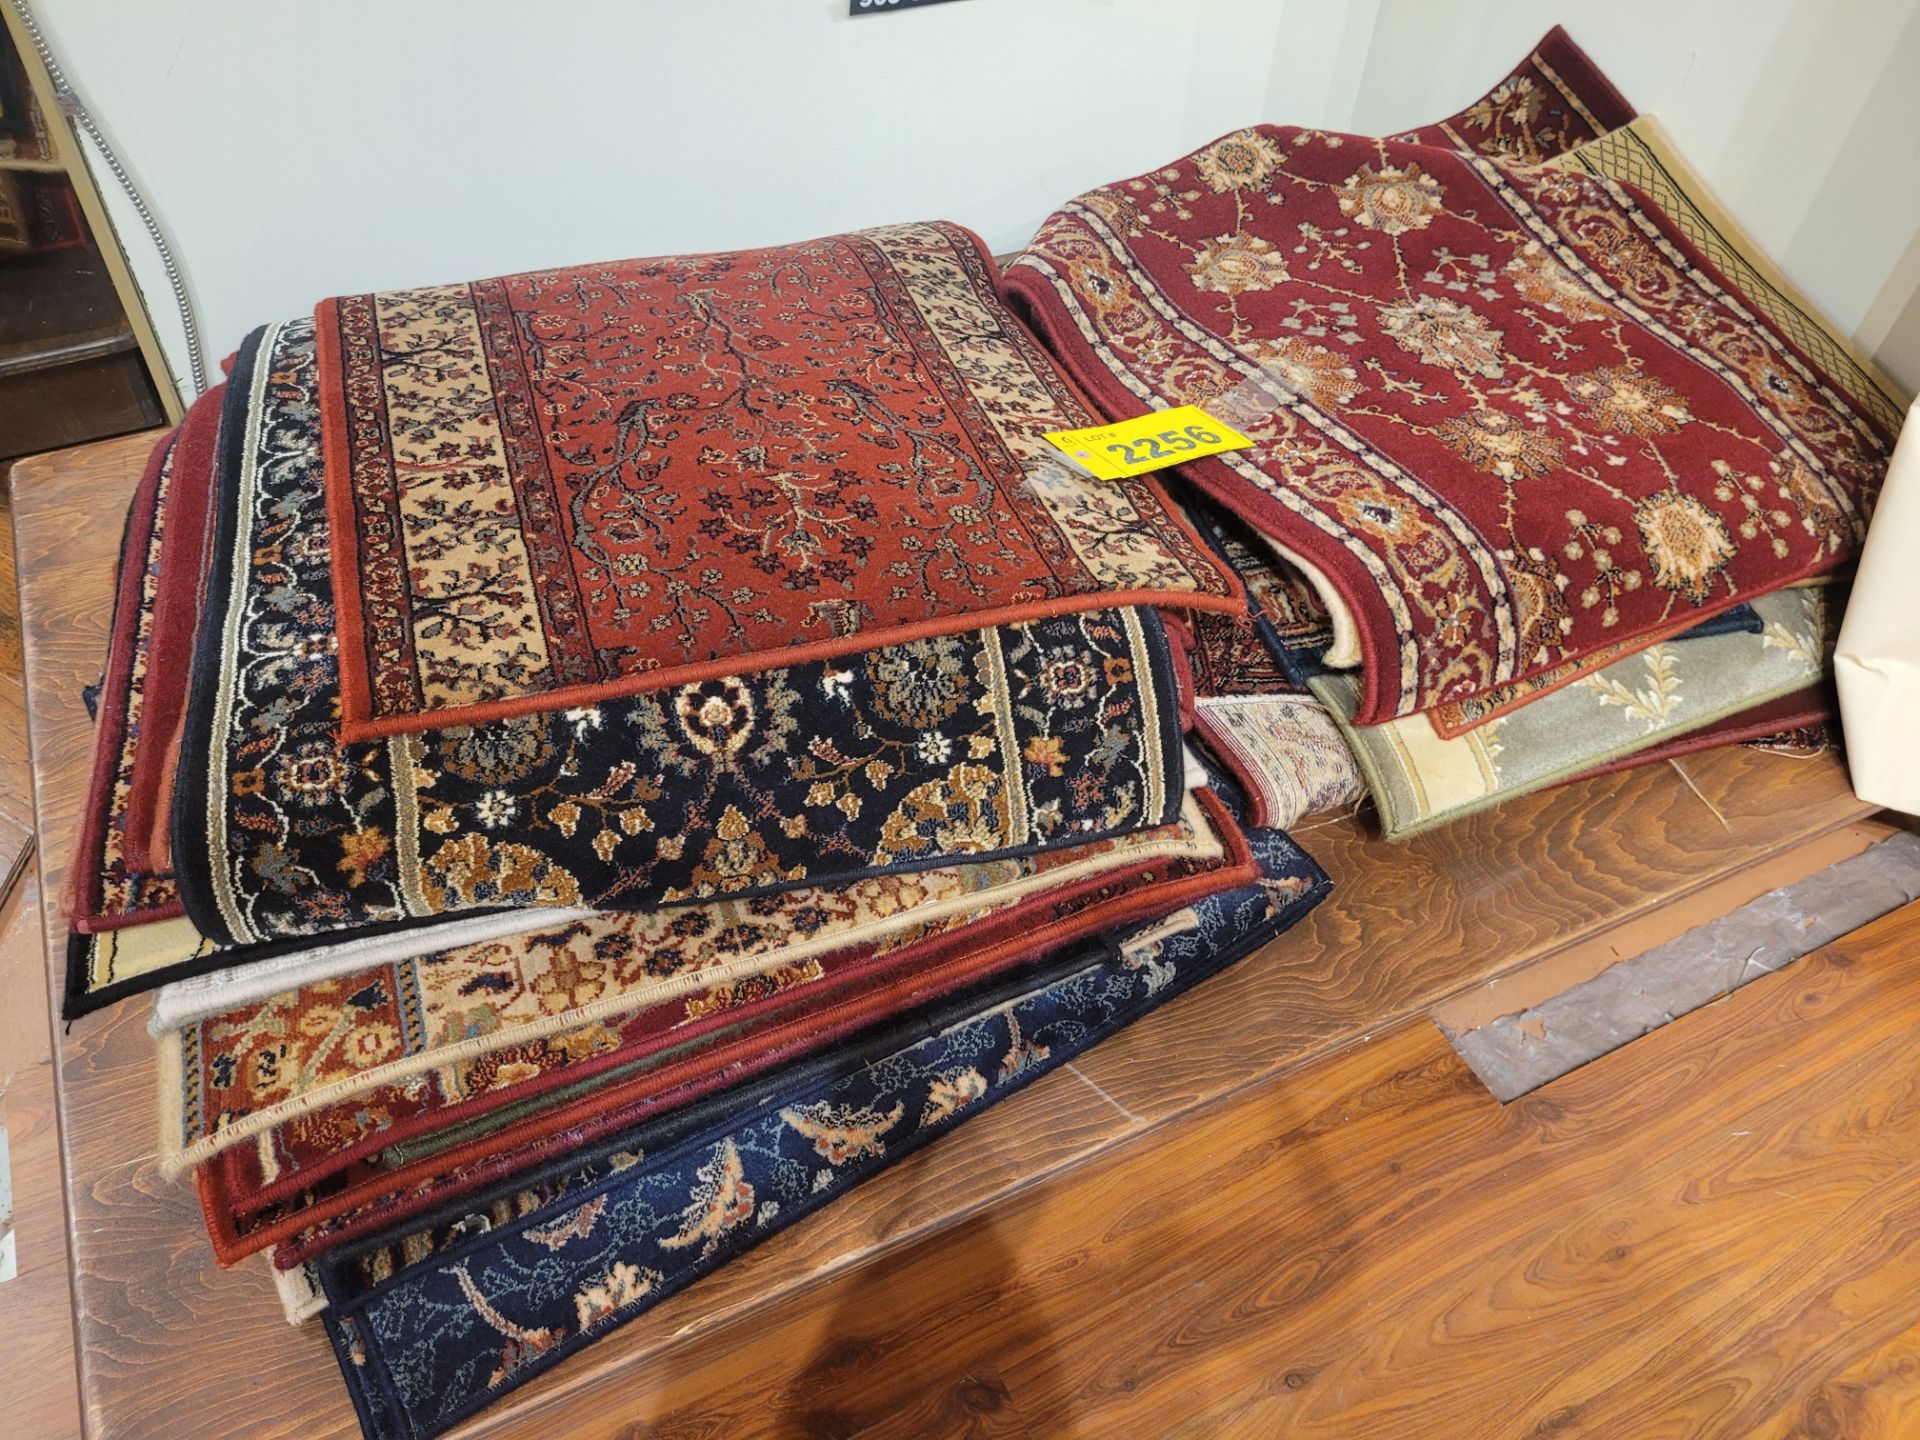 LOT - ASSORTED RUGS, SAMPLES, ETC.